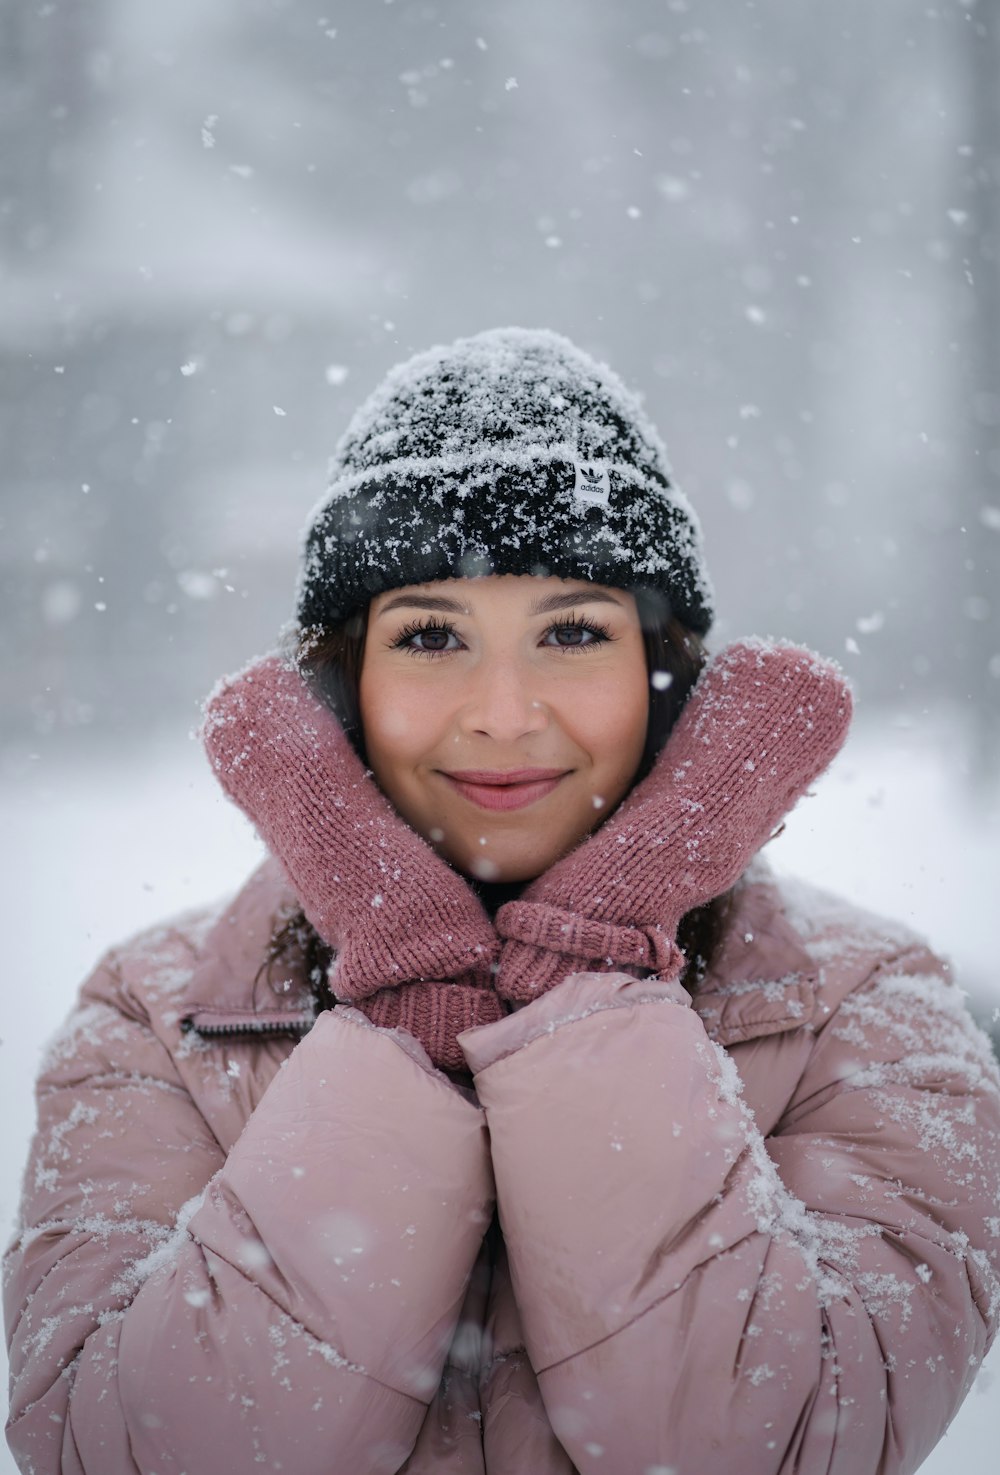 a woman wearing a pink coat and a black hat in the snow